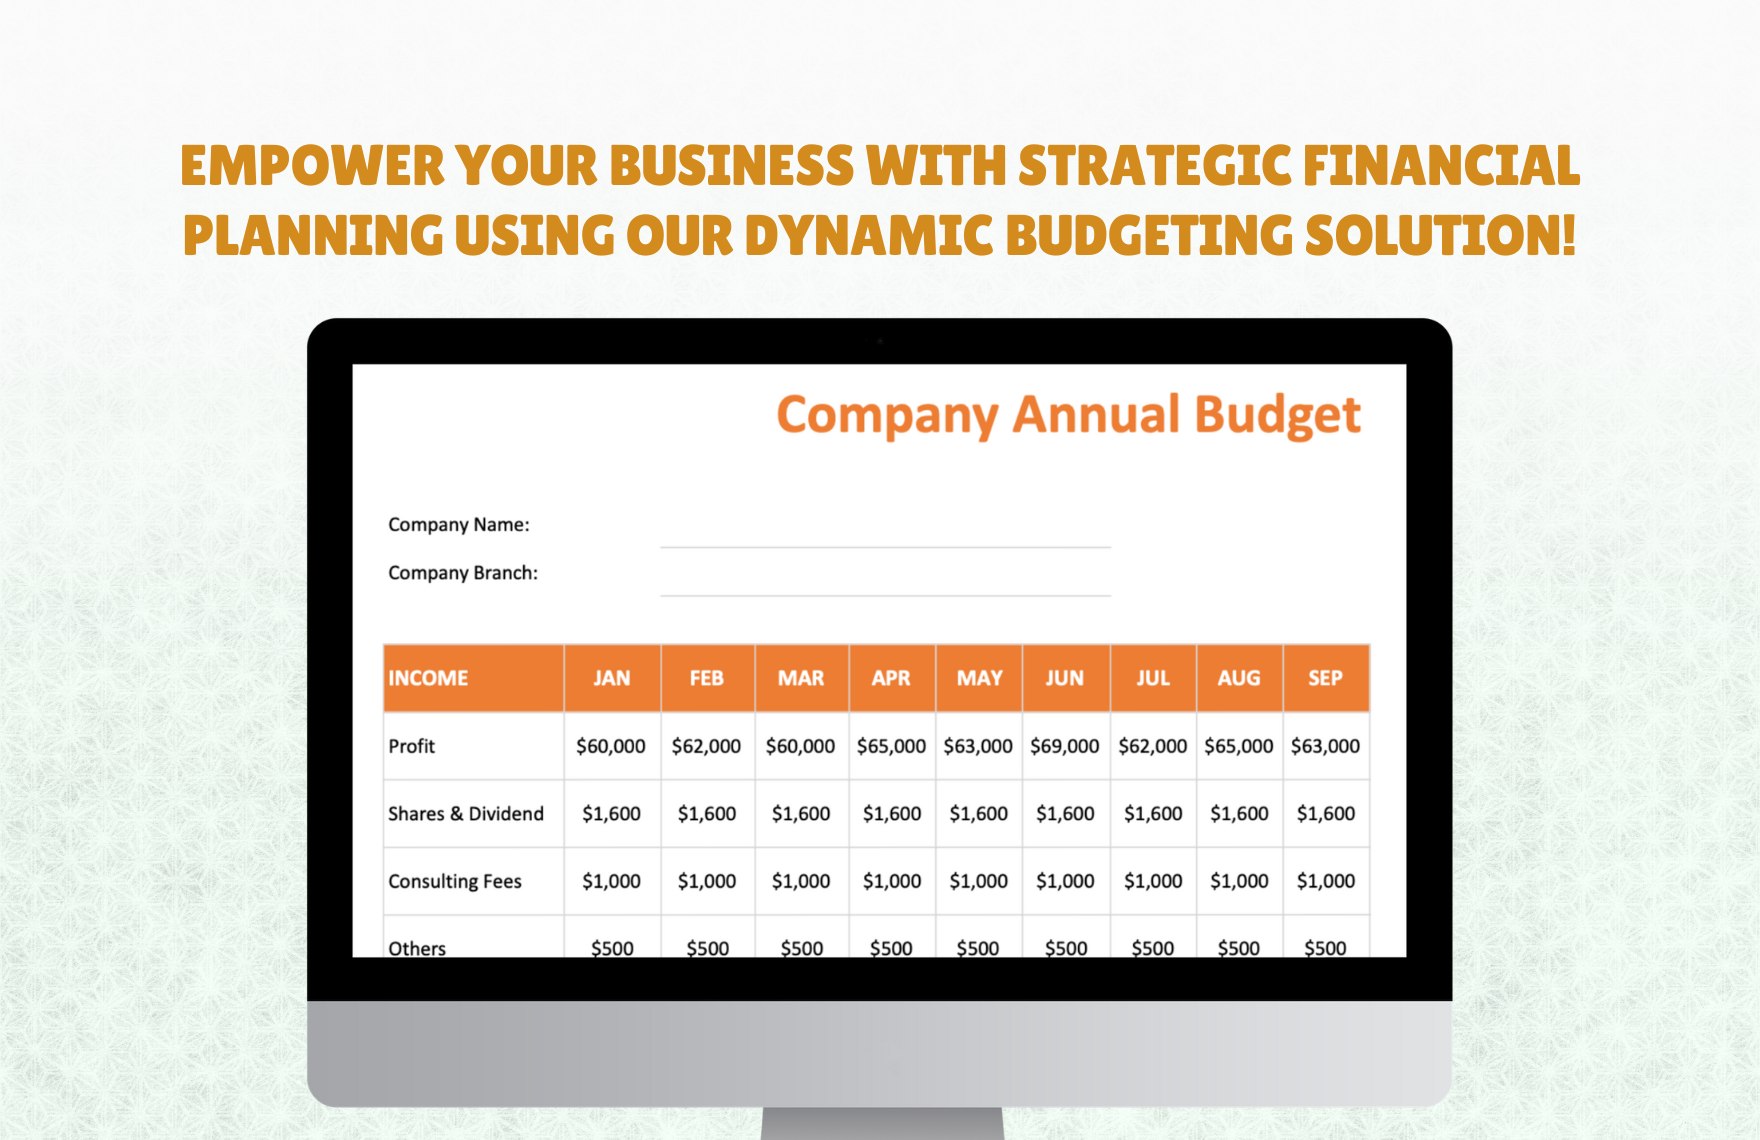 Company Annual Budget Template